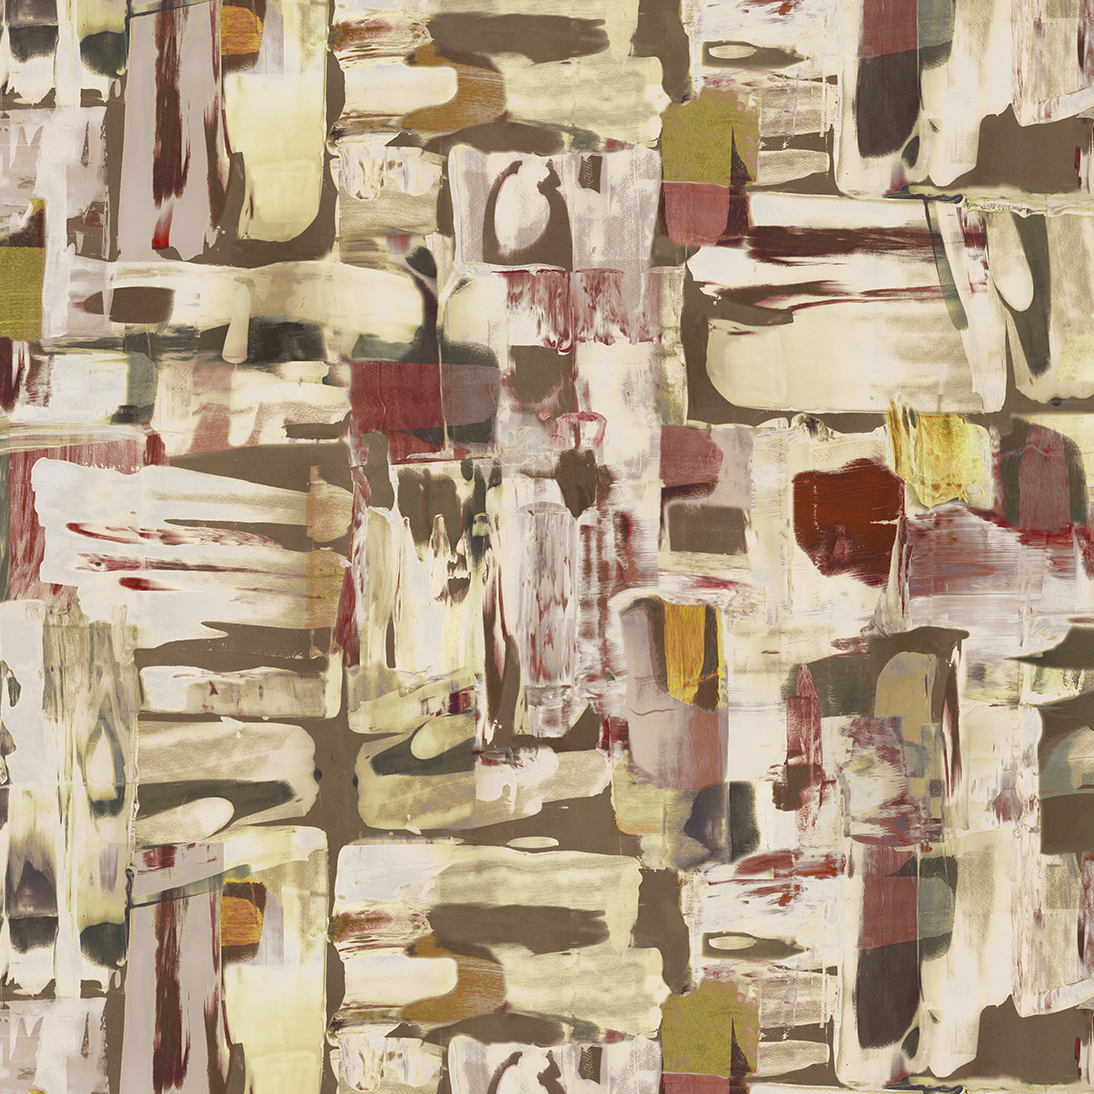 Wallpaper swatch in a dense hand-painted brushstroke pattern in shades of green, olive and maroon.